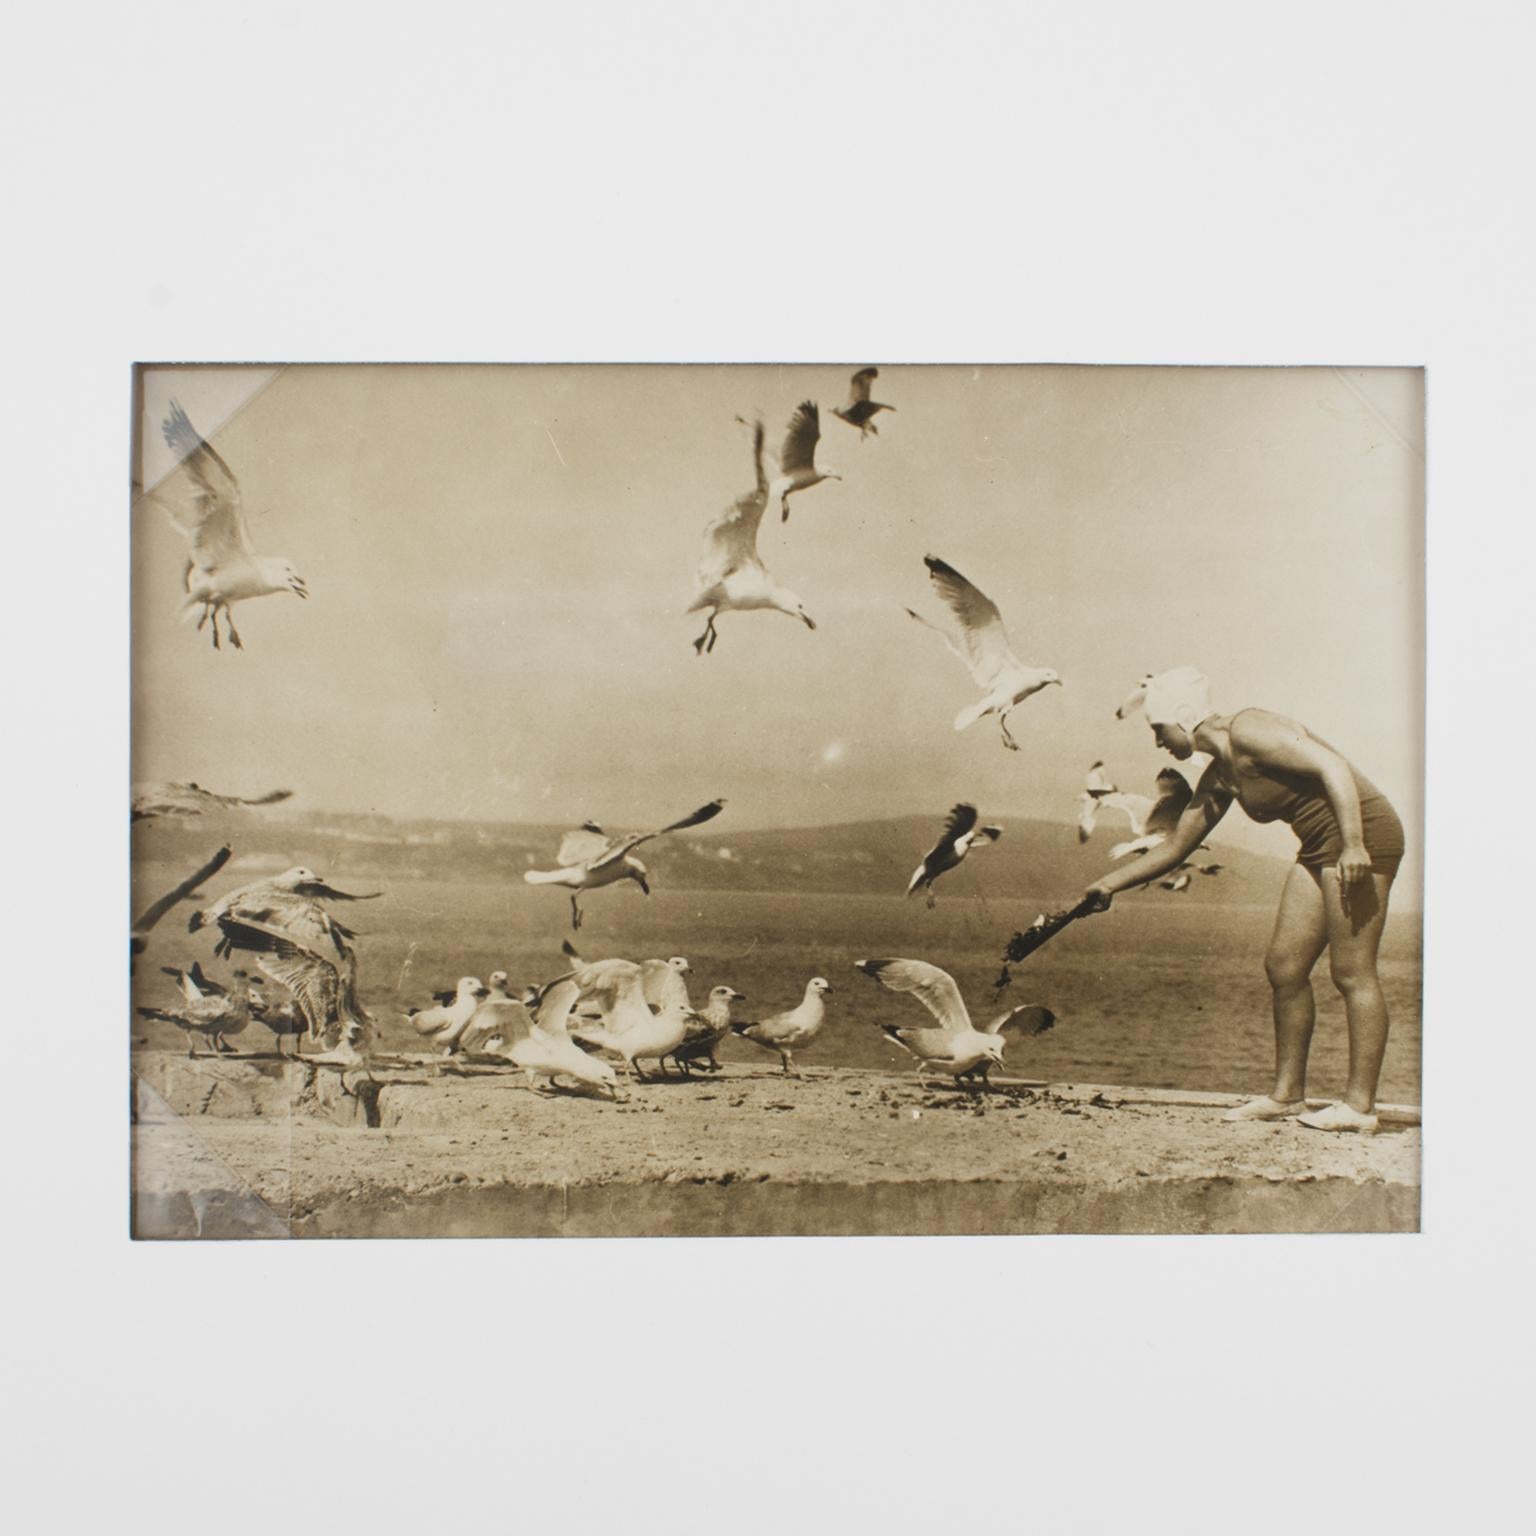 On the Beach with the Seagulls, 1930 Silver Gelatin Black and White Photography - Brown Landscape Photograph by Press Agency Trampus